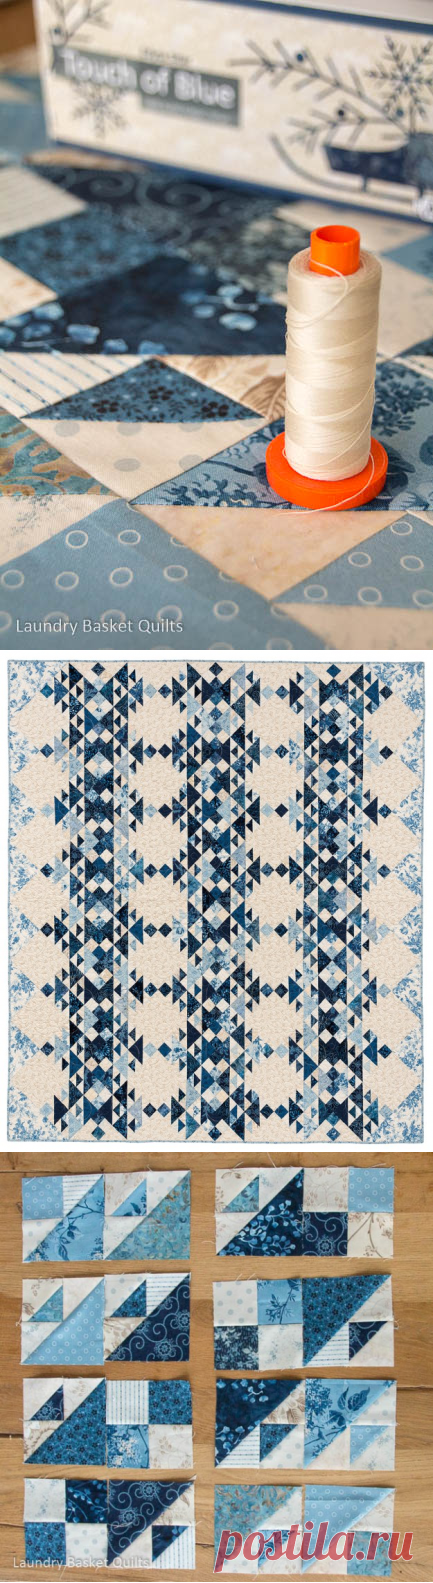 Patches of Blue Quilt Along – Block 1 “Frost” |